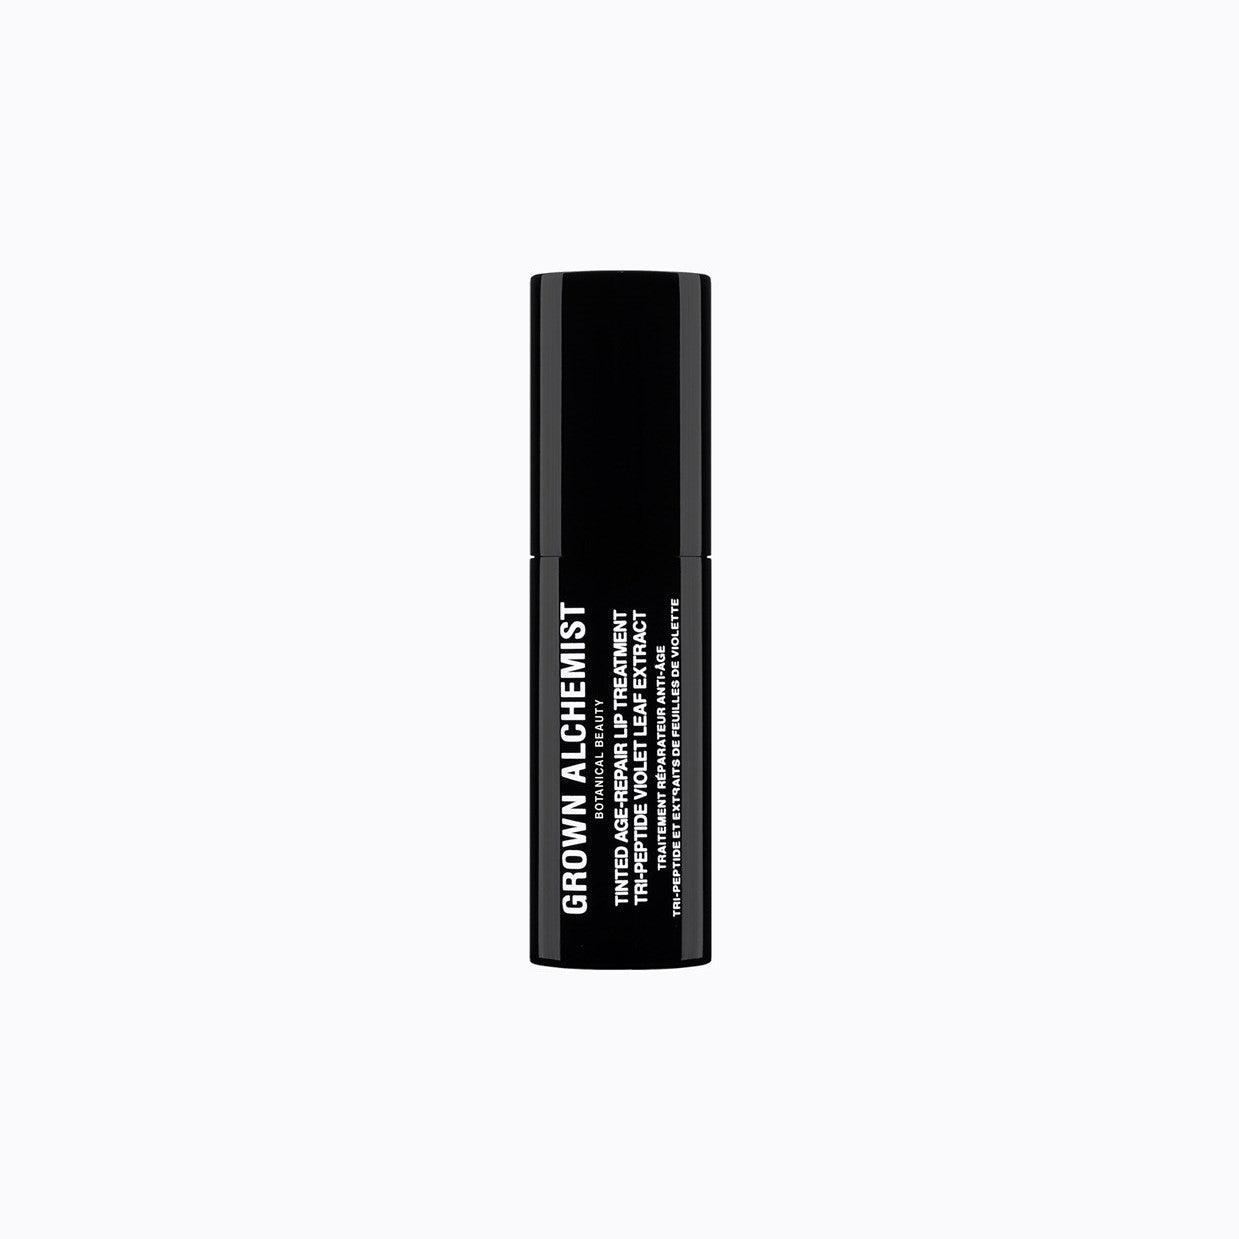 Tinted Age-Repair Lip Treatment: Tri-Peptide, Violet Leaf Extract